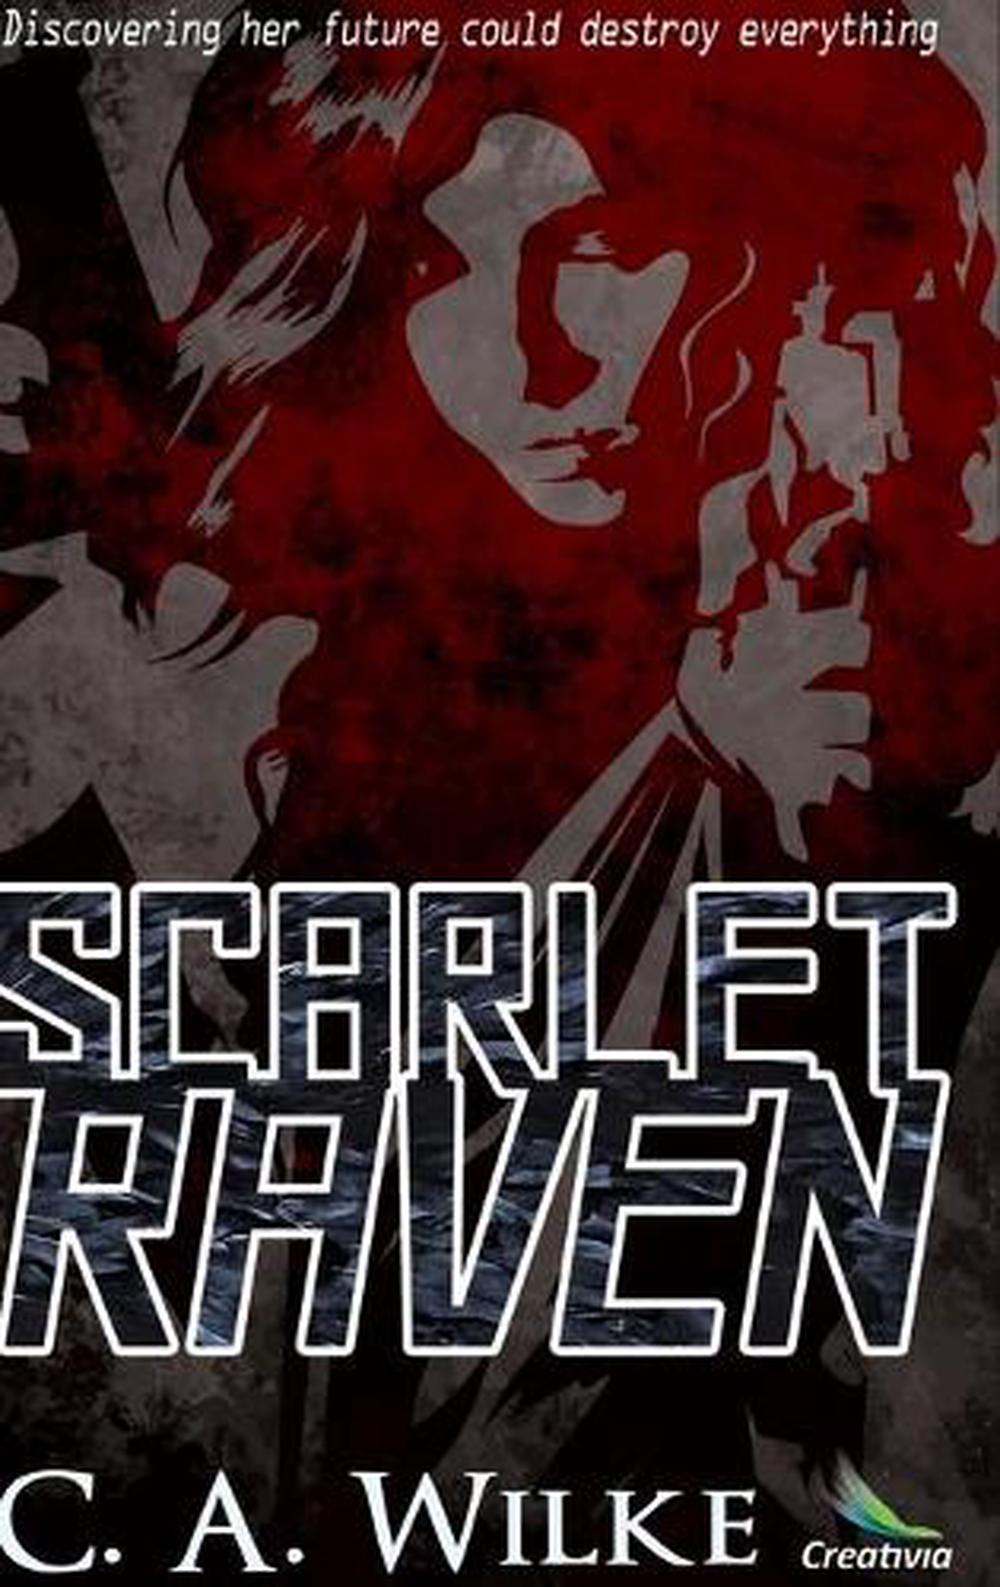 Scarlet Raven By Ca Wilke Hardcover Book Free Shipping 9781715837587